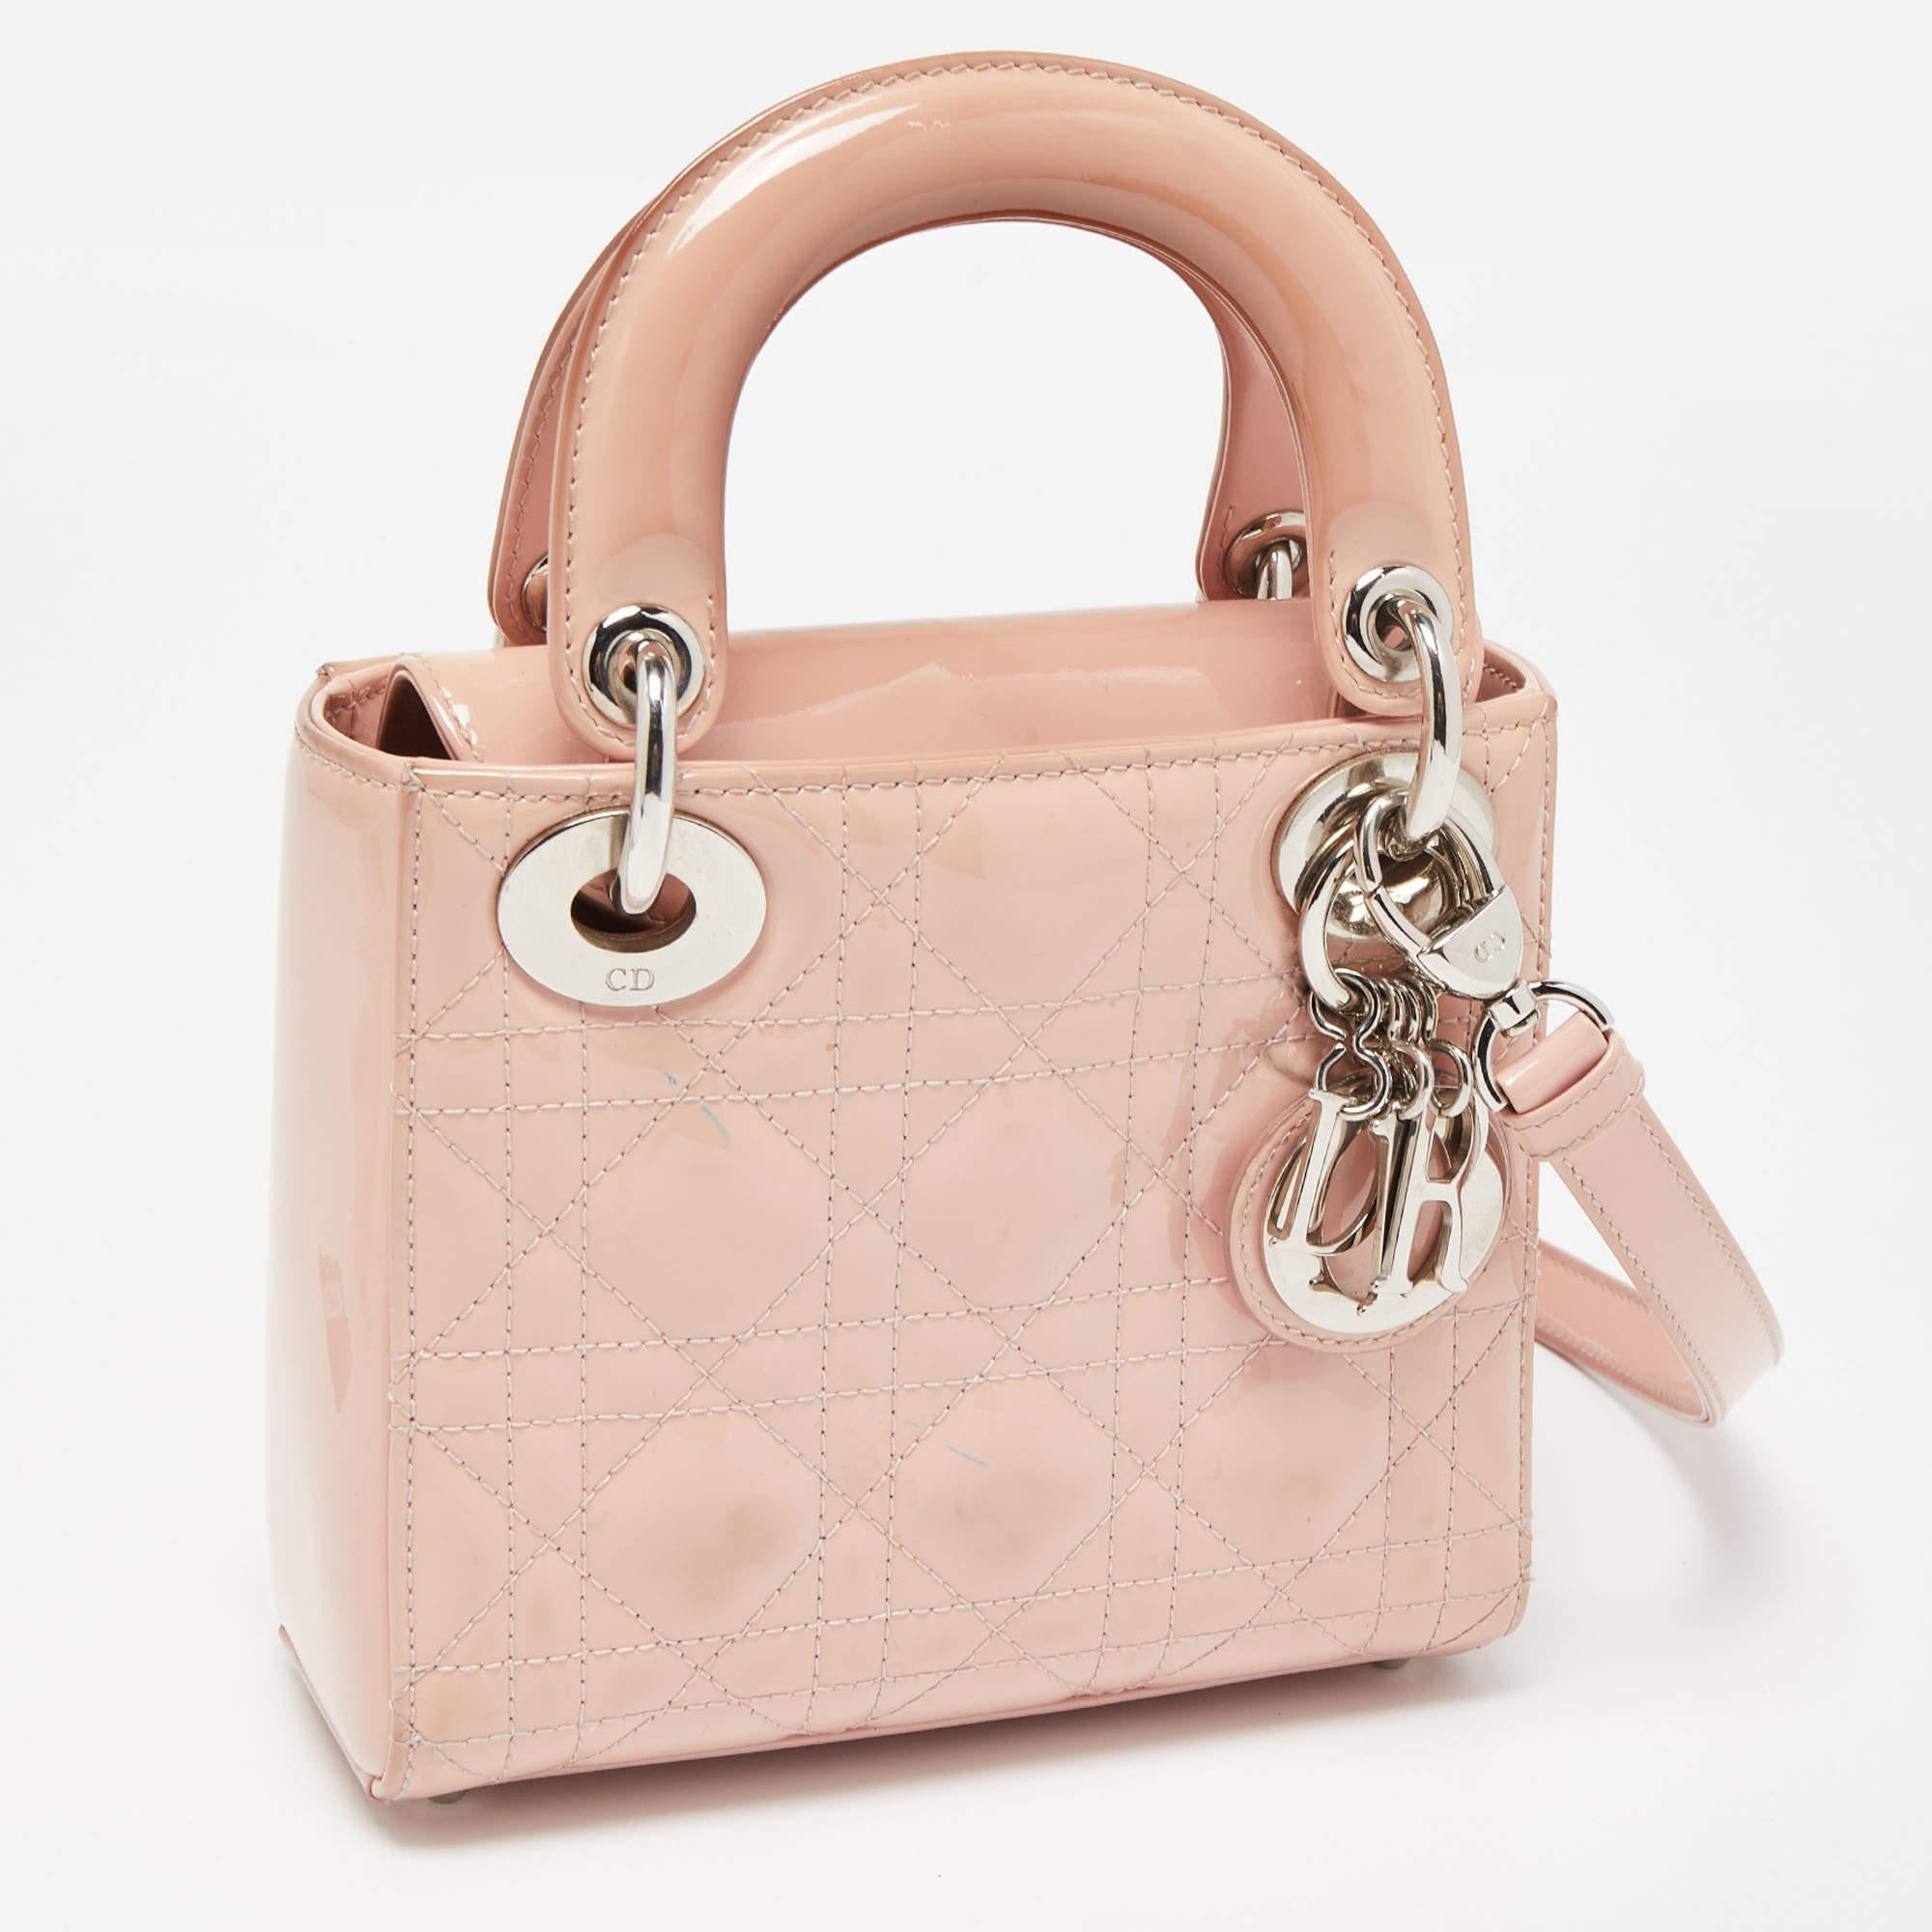 A timeless status and great design mark the Lady Dior tote. It is an iconic bag that people continue to invest in to this day. We have here this classic beauty crafted from beige Cannage patent leather. This mini Lady Dior is complete with two top